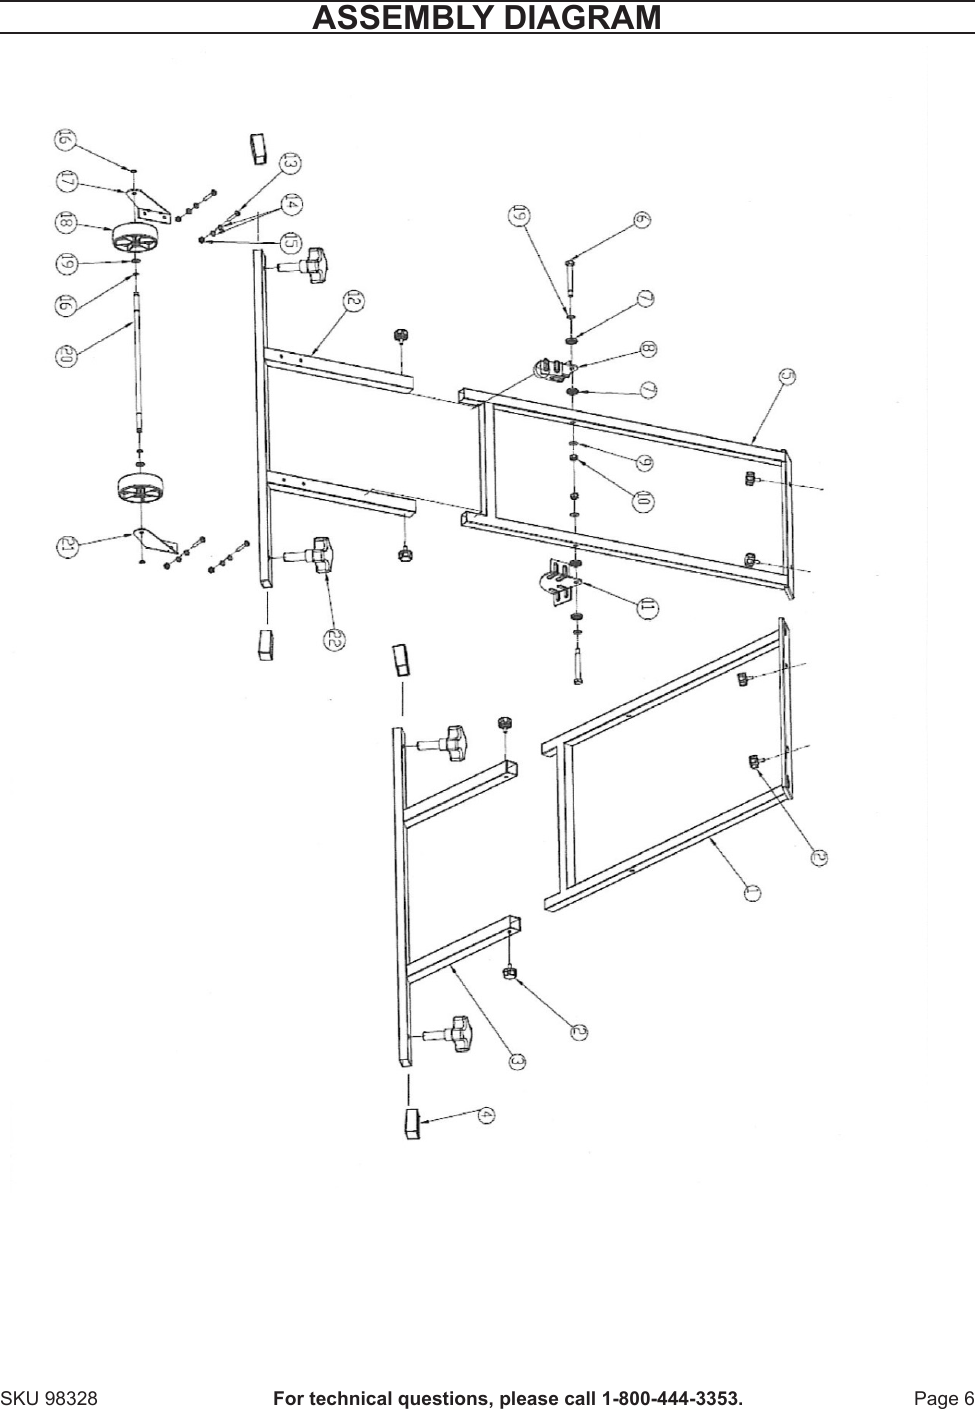 Page 6 of 7 - Manual For The 98328 Tile Saw Stand With Wheels